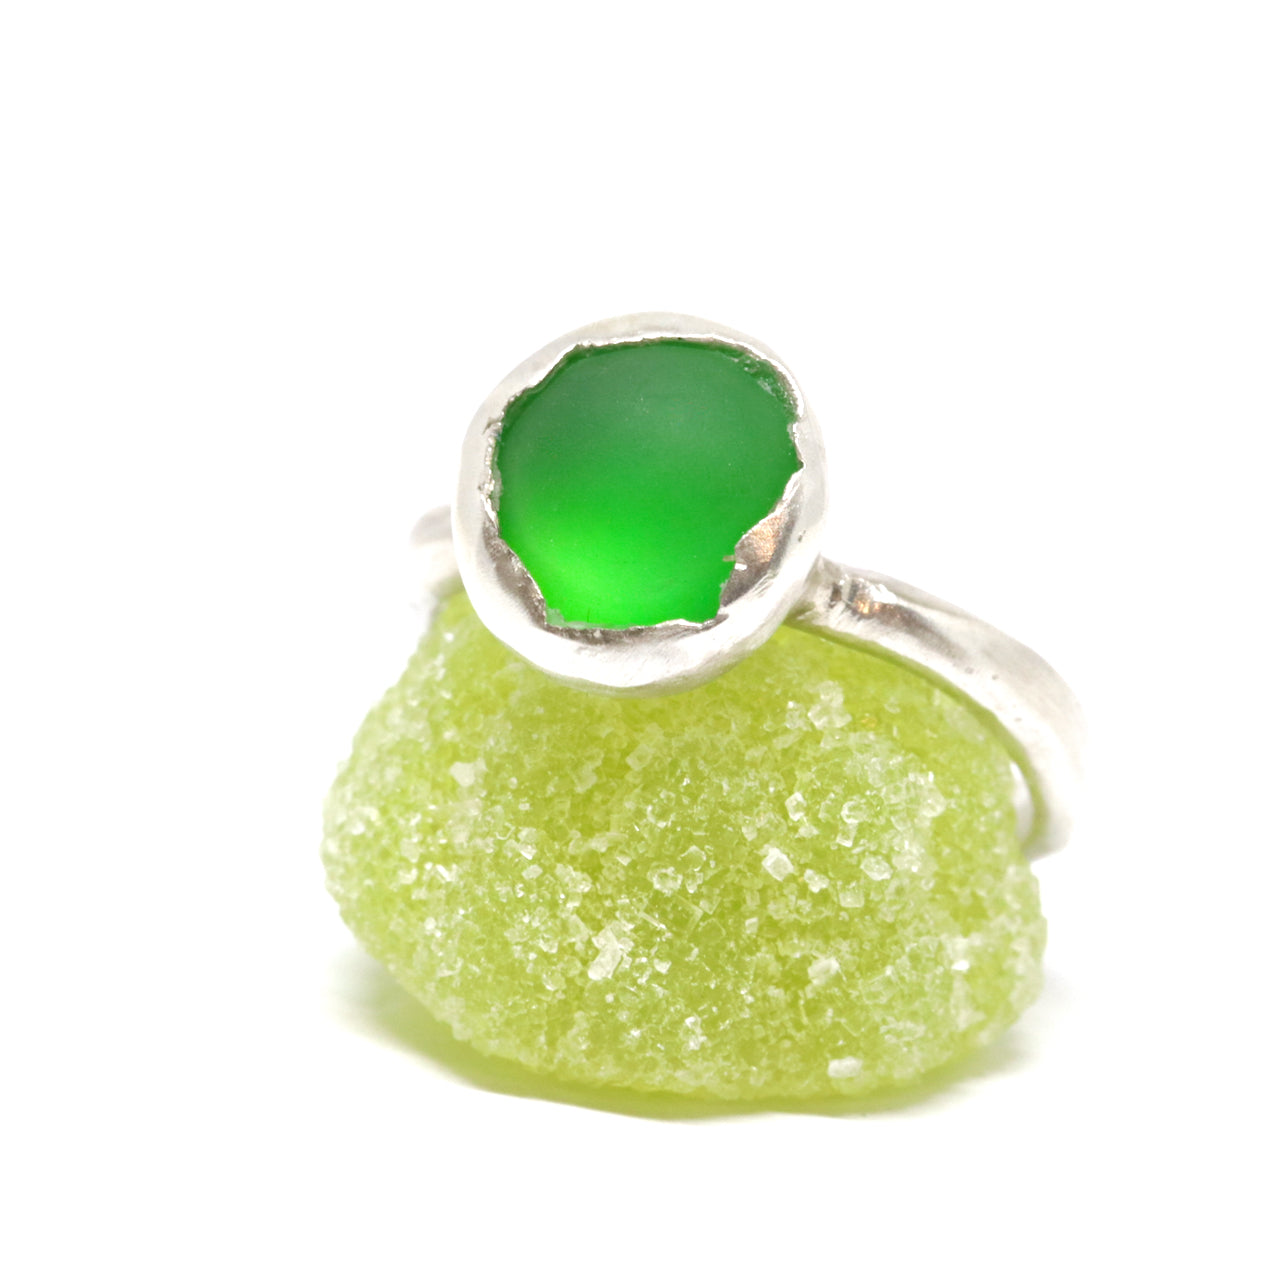 Juicy bright green resin Button ring_Fruit Bowl Studio_made in Wanaka